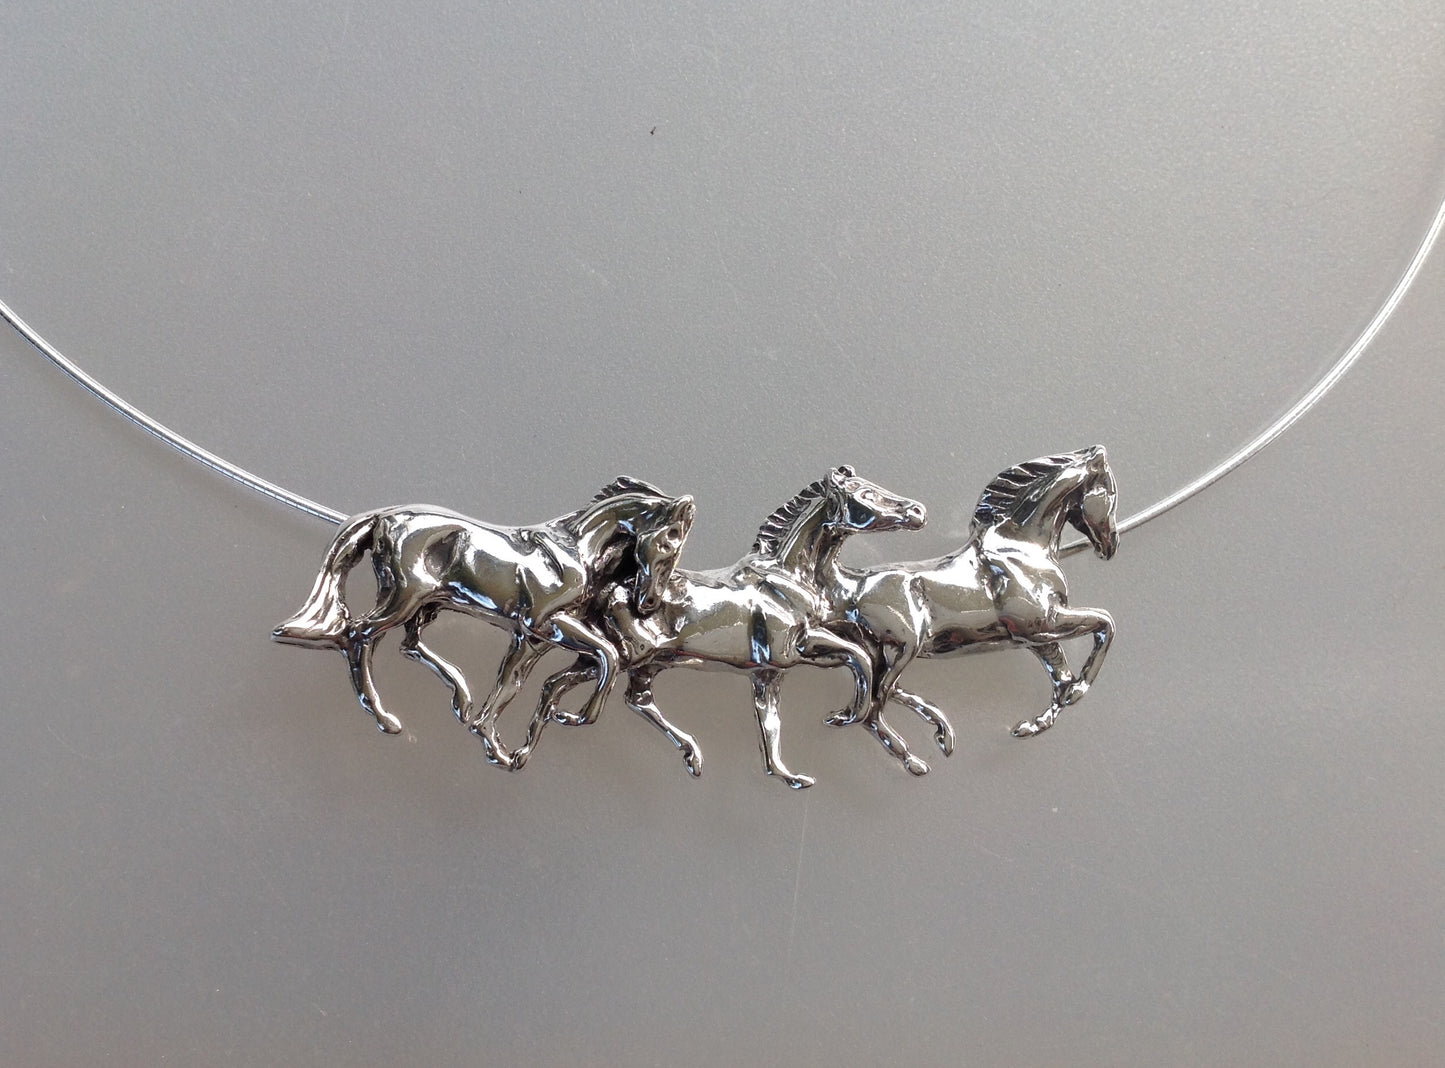 Three Running Horses Necklace Sterling Silver with Heavy SNAKE Chain Beverly Zimmer Original